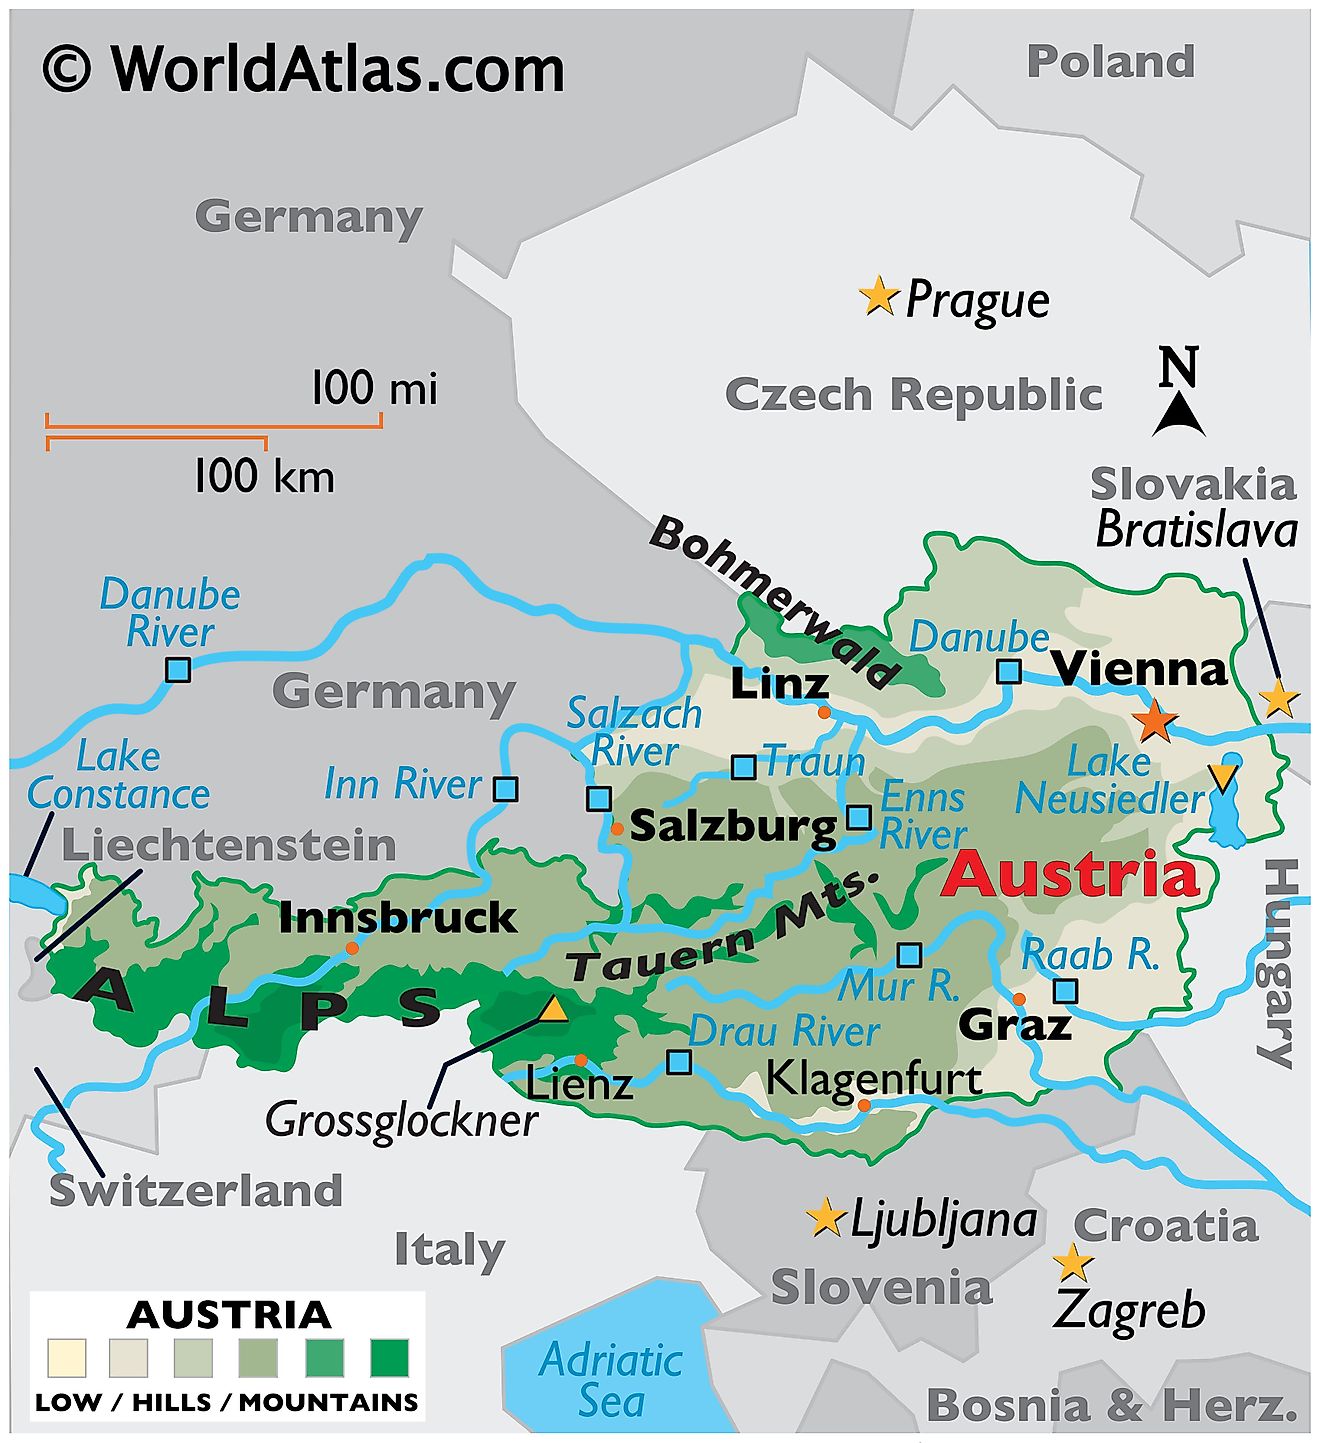 Physical Map of Austria showing terrain, major rivers, extreme points, mountain ranges, Lake Neusiedler, important cities, international boundaries, etc.